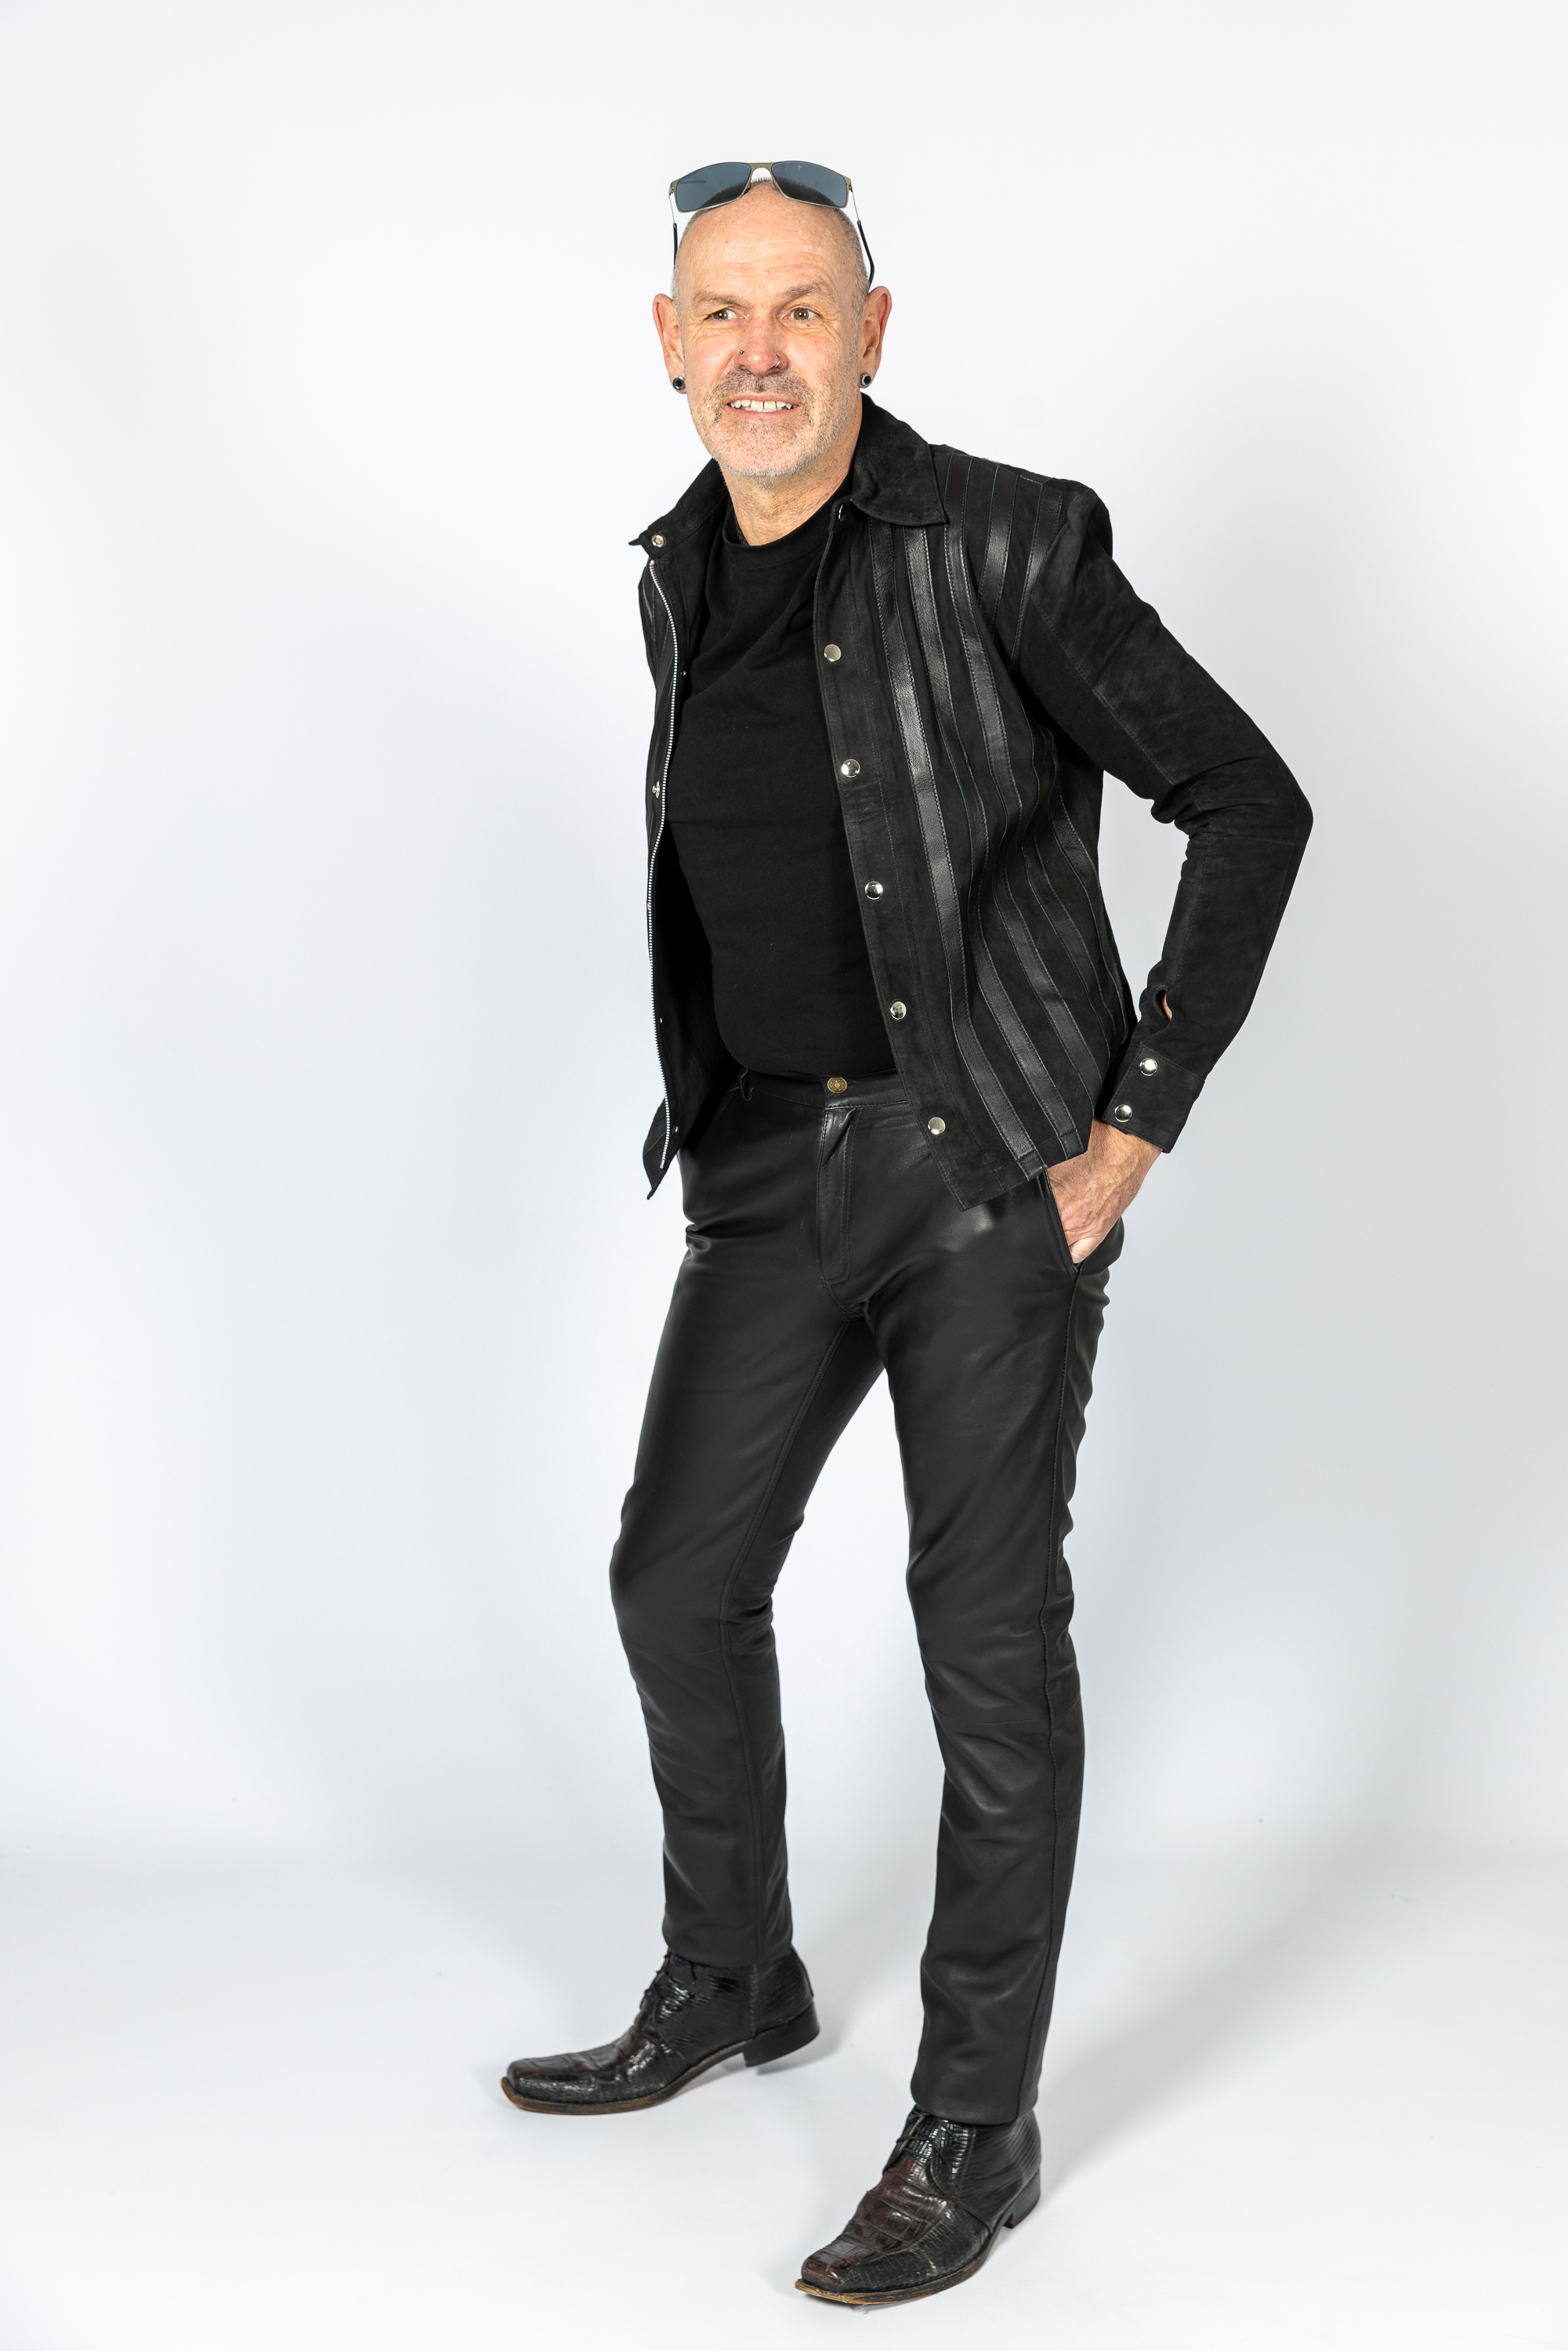 Chino pants as noble - real leather pants black